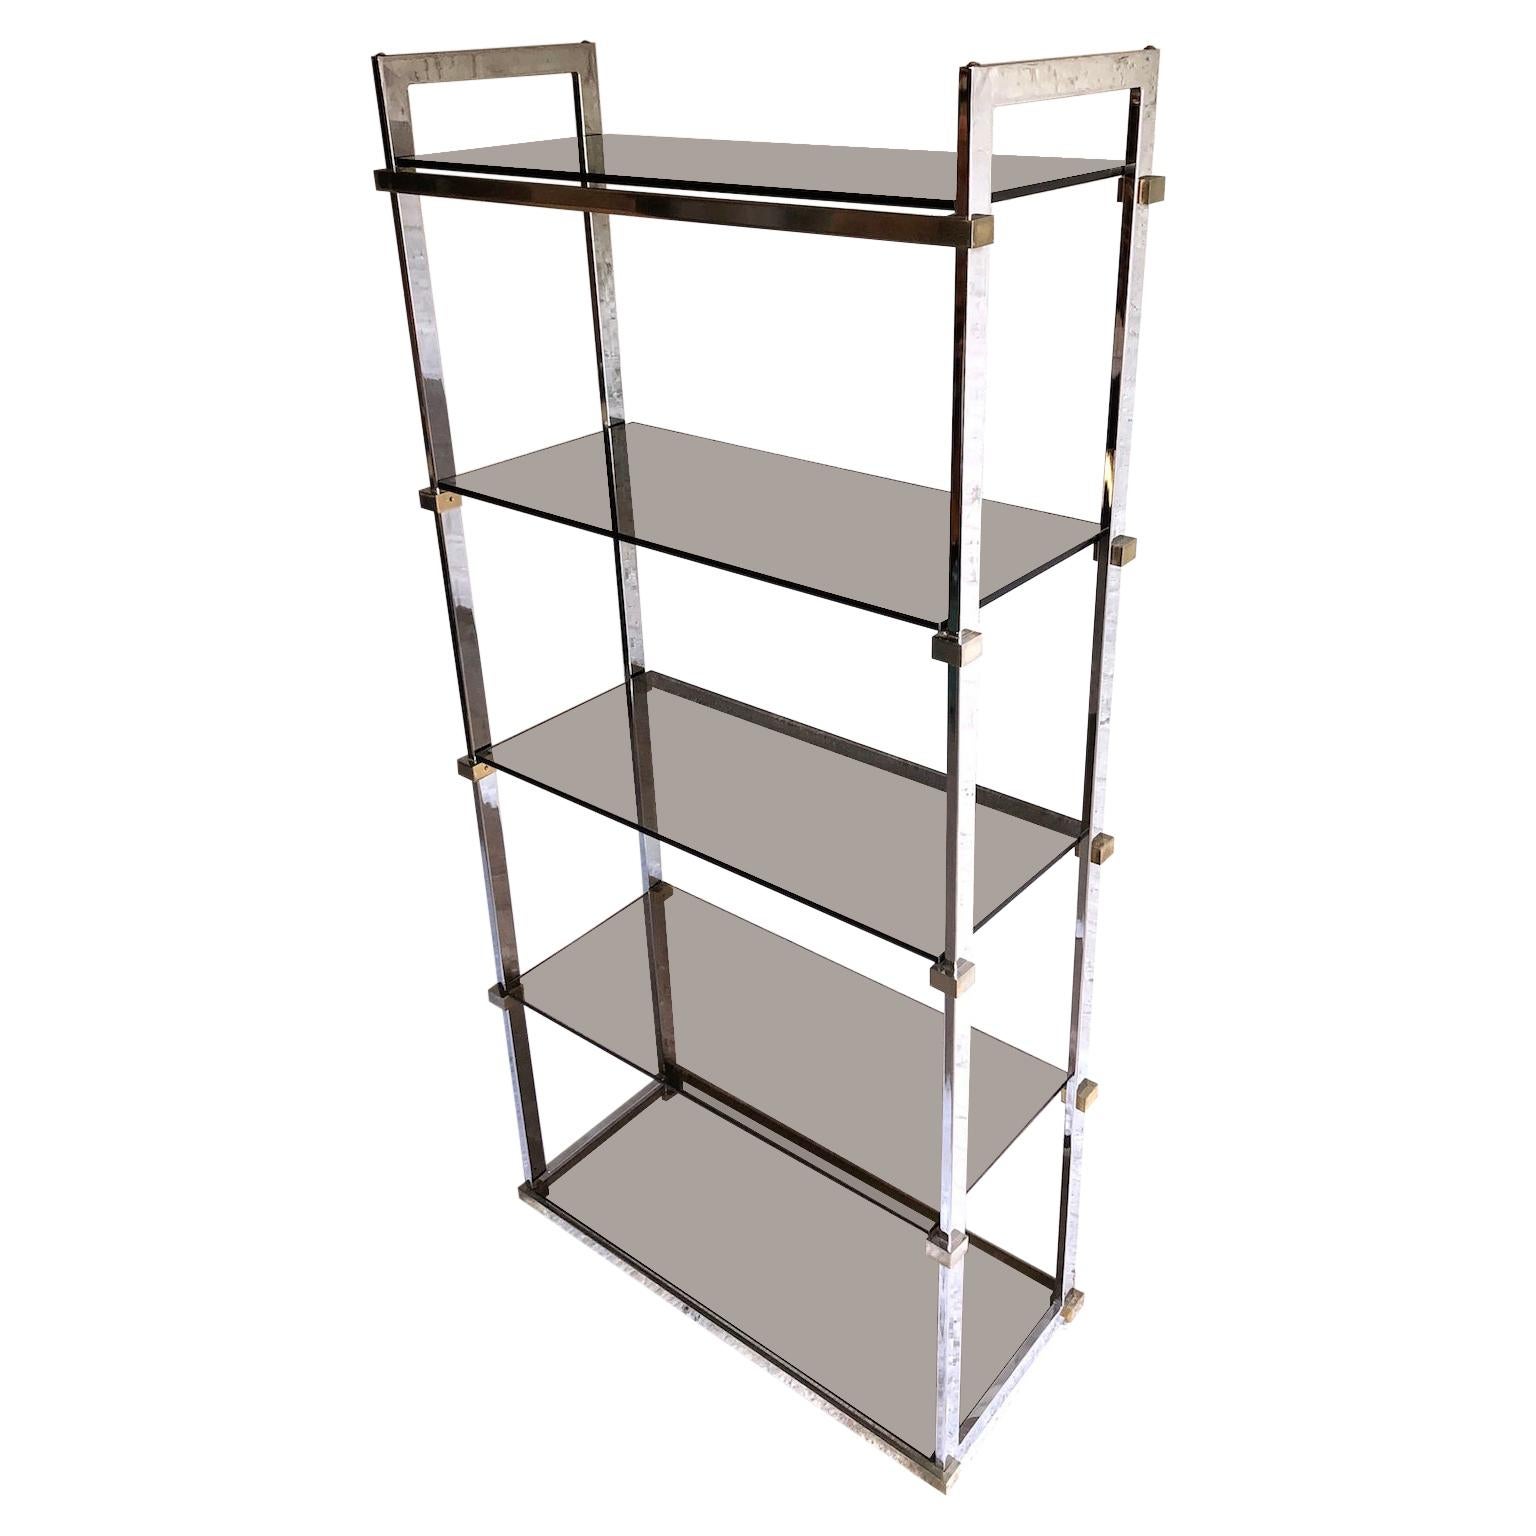 Midcentury Chrome and Glass Shelving Unit Pieff, 1970s